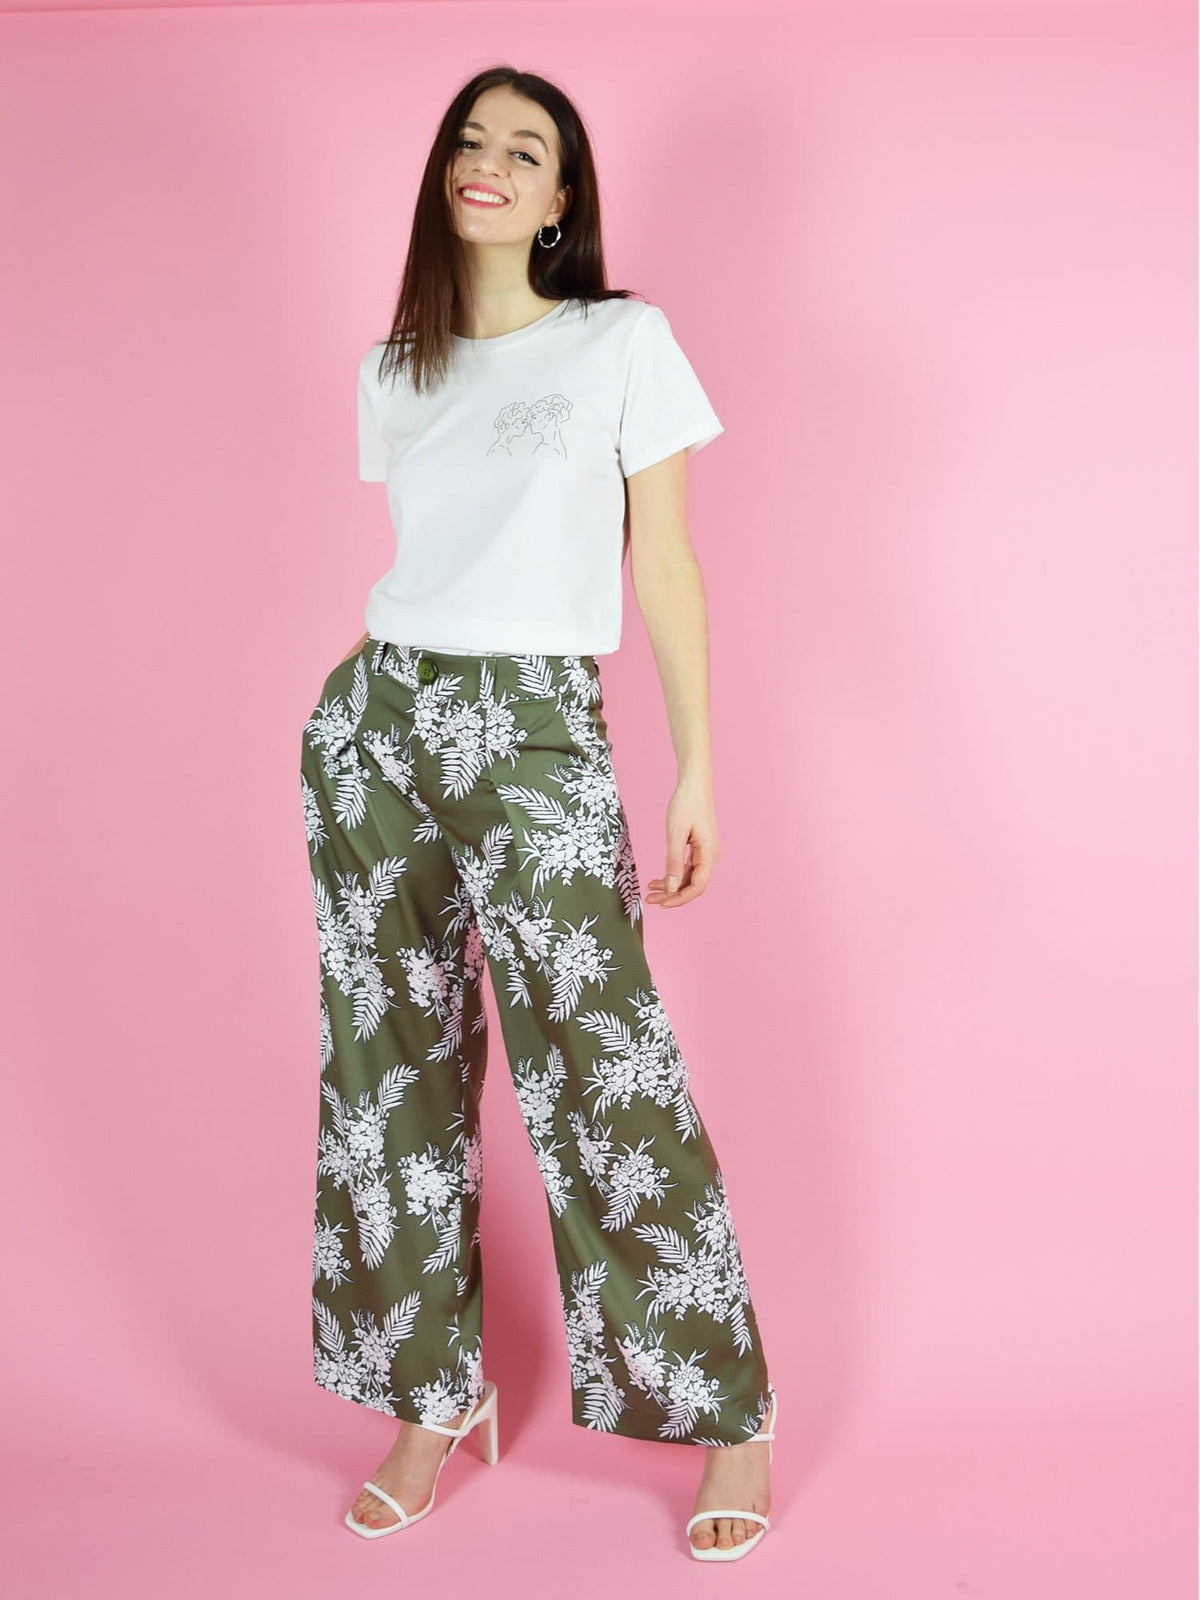 Frontshot of blonde gone rogue's lover's eyes organic cotton tee in white and the girlboss high wasited trousers in green with white floral print.